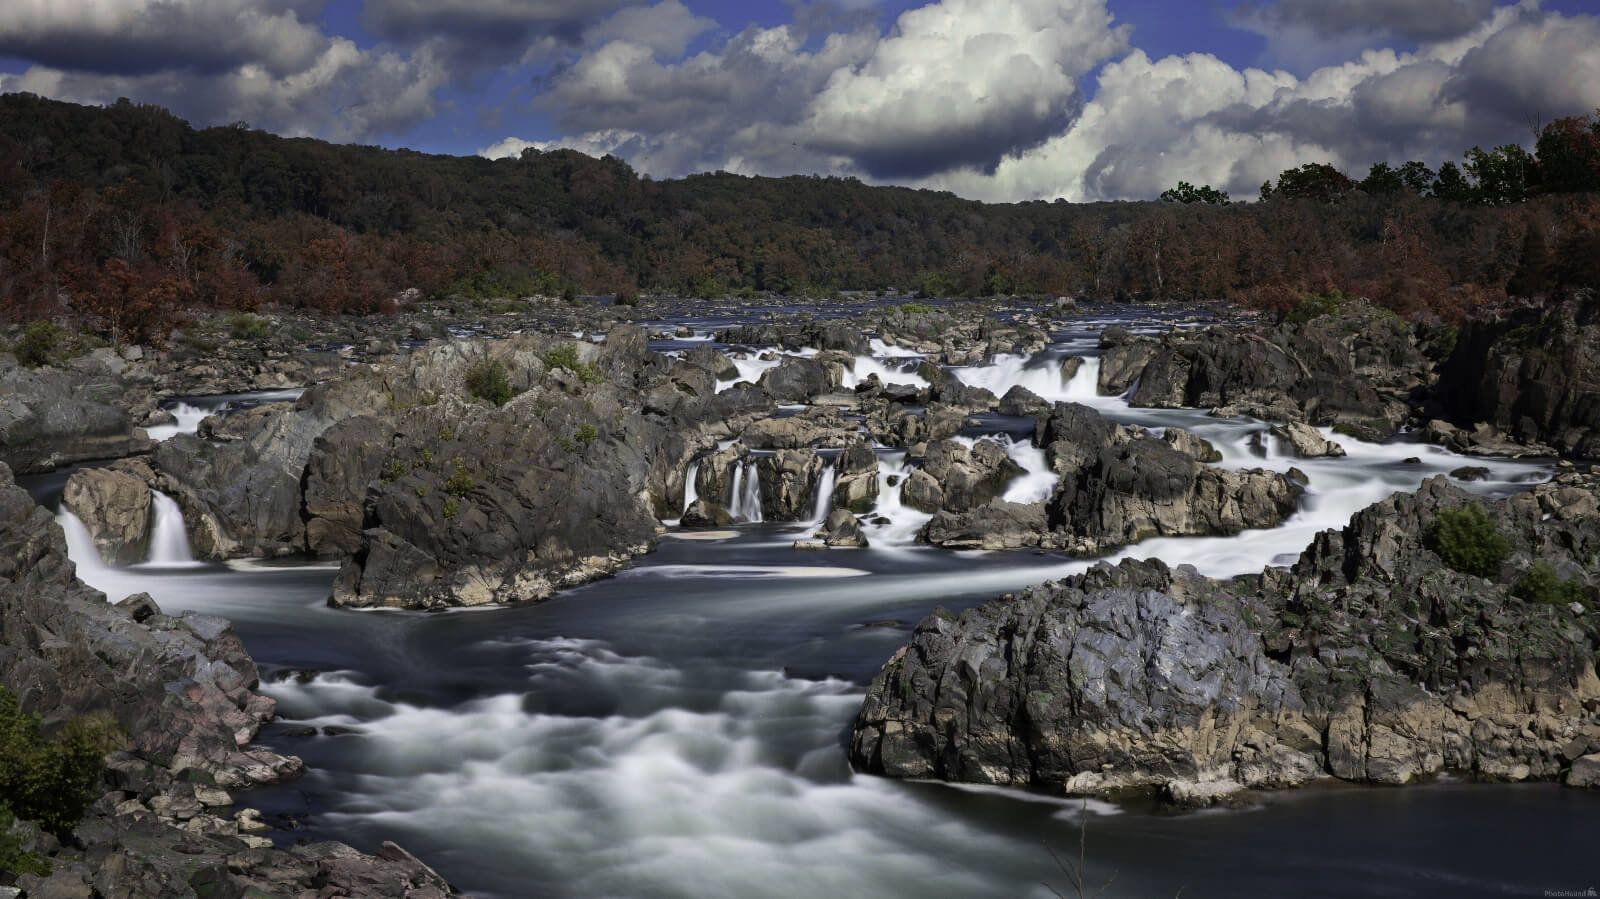 Image of Great Falls from Overlook 3 by Tom Ossim